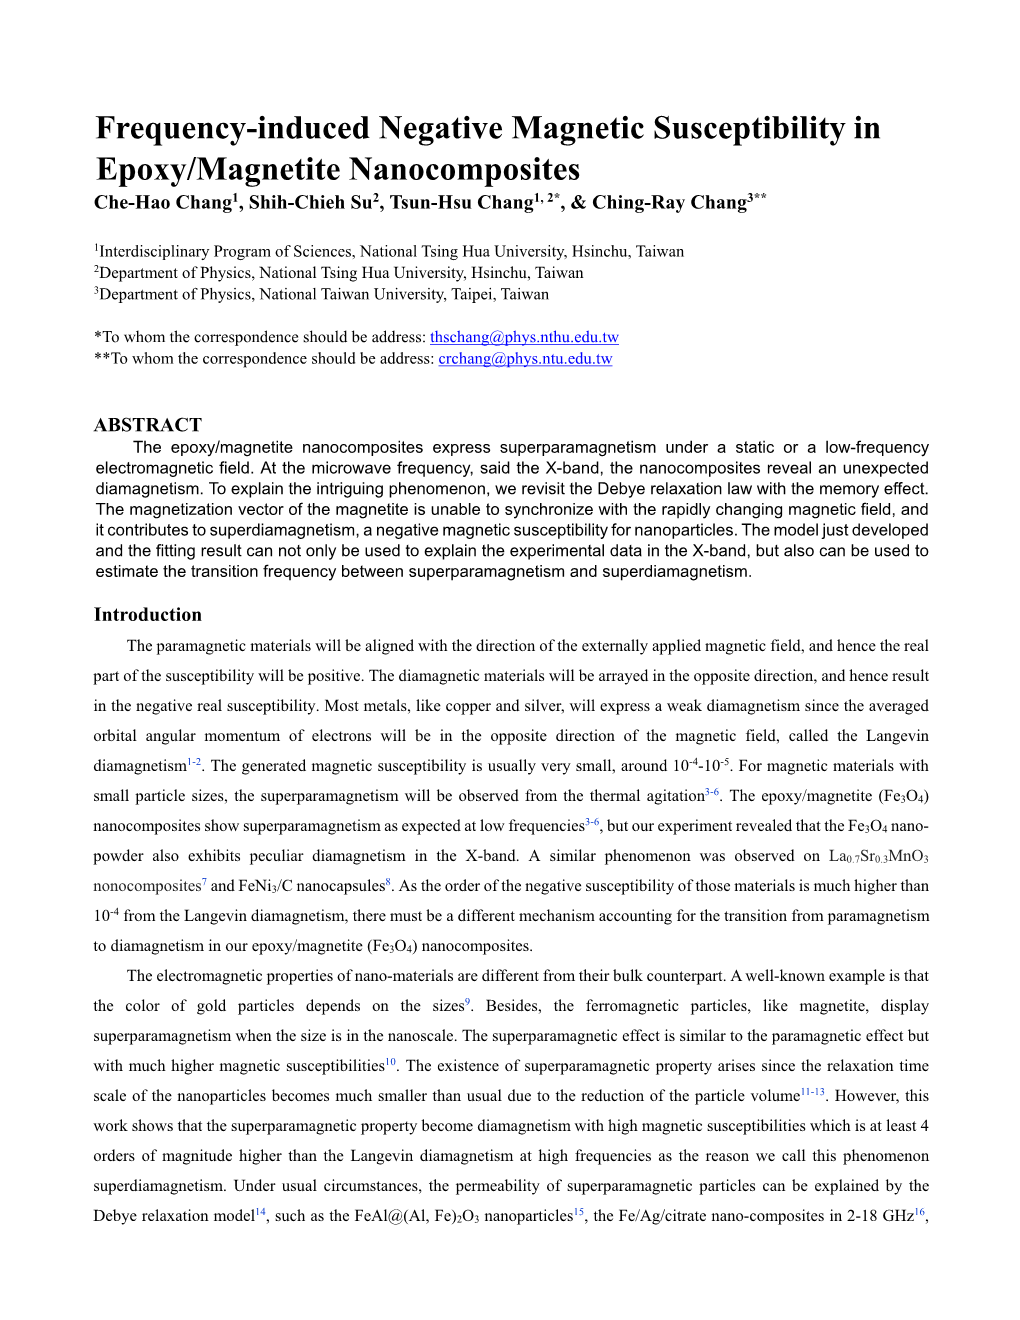 Frequency-Induced Negative Magnetic Susceptibility in Epoxy/Magnetite Nanocomposites Che-Hao Chang1, Shih-Chieh Su2, Tsun-Hsu Chang1, 2*, & Ching-Ray Chang3**